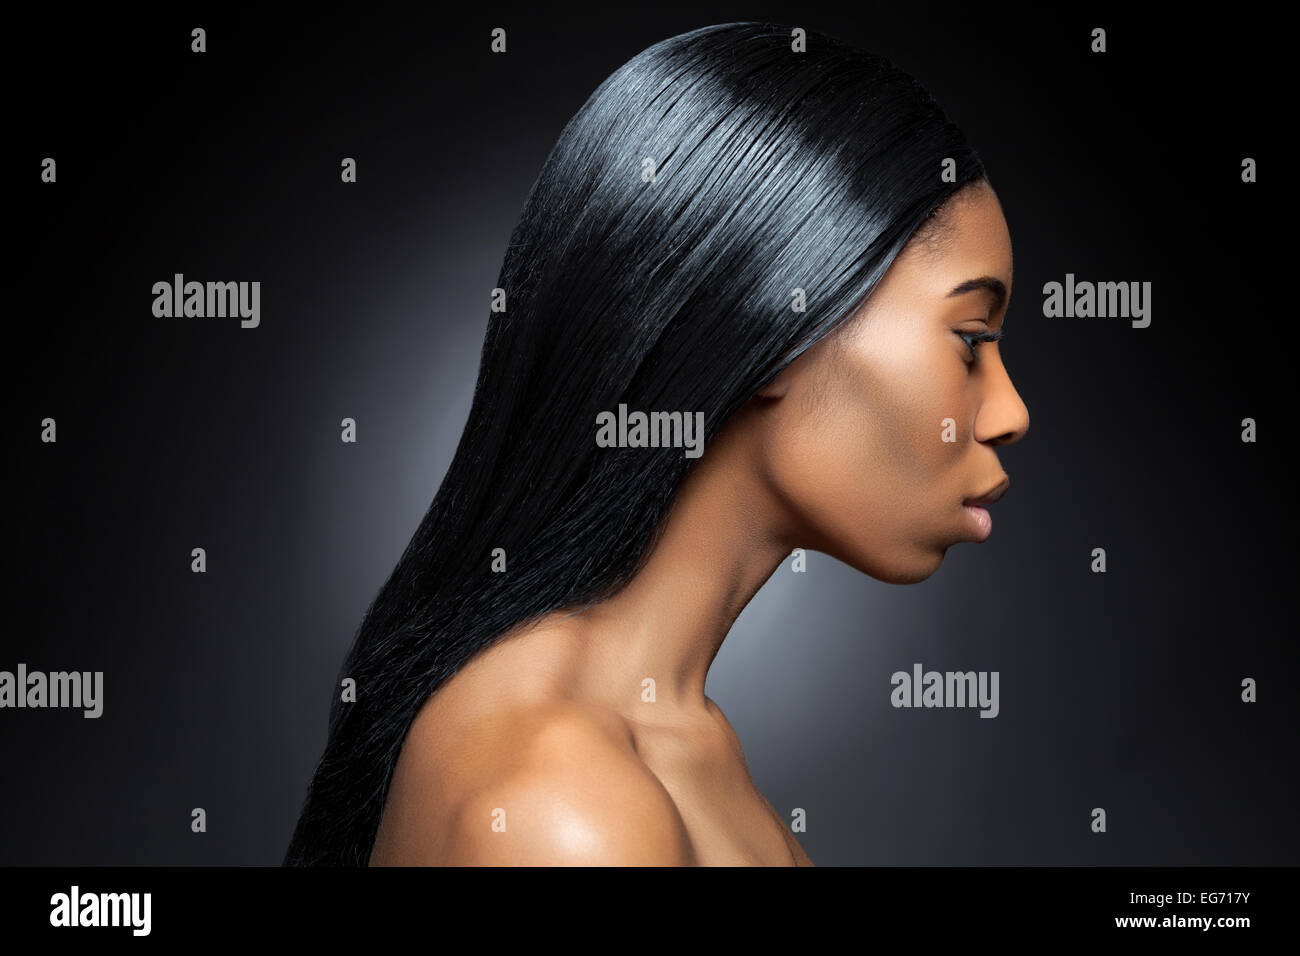 Profile of an young black beauty with long straight and shiny hair Stock Photo